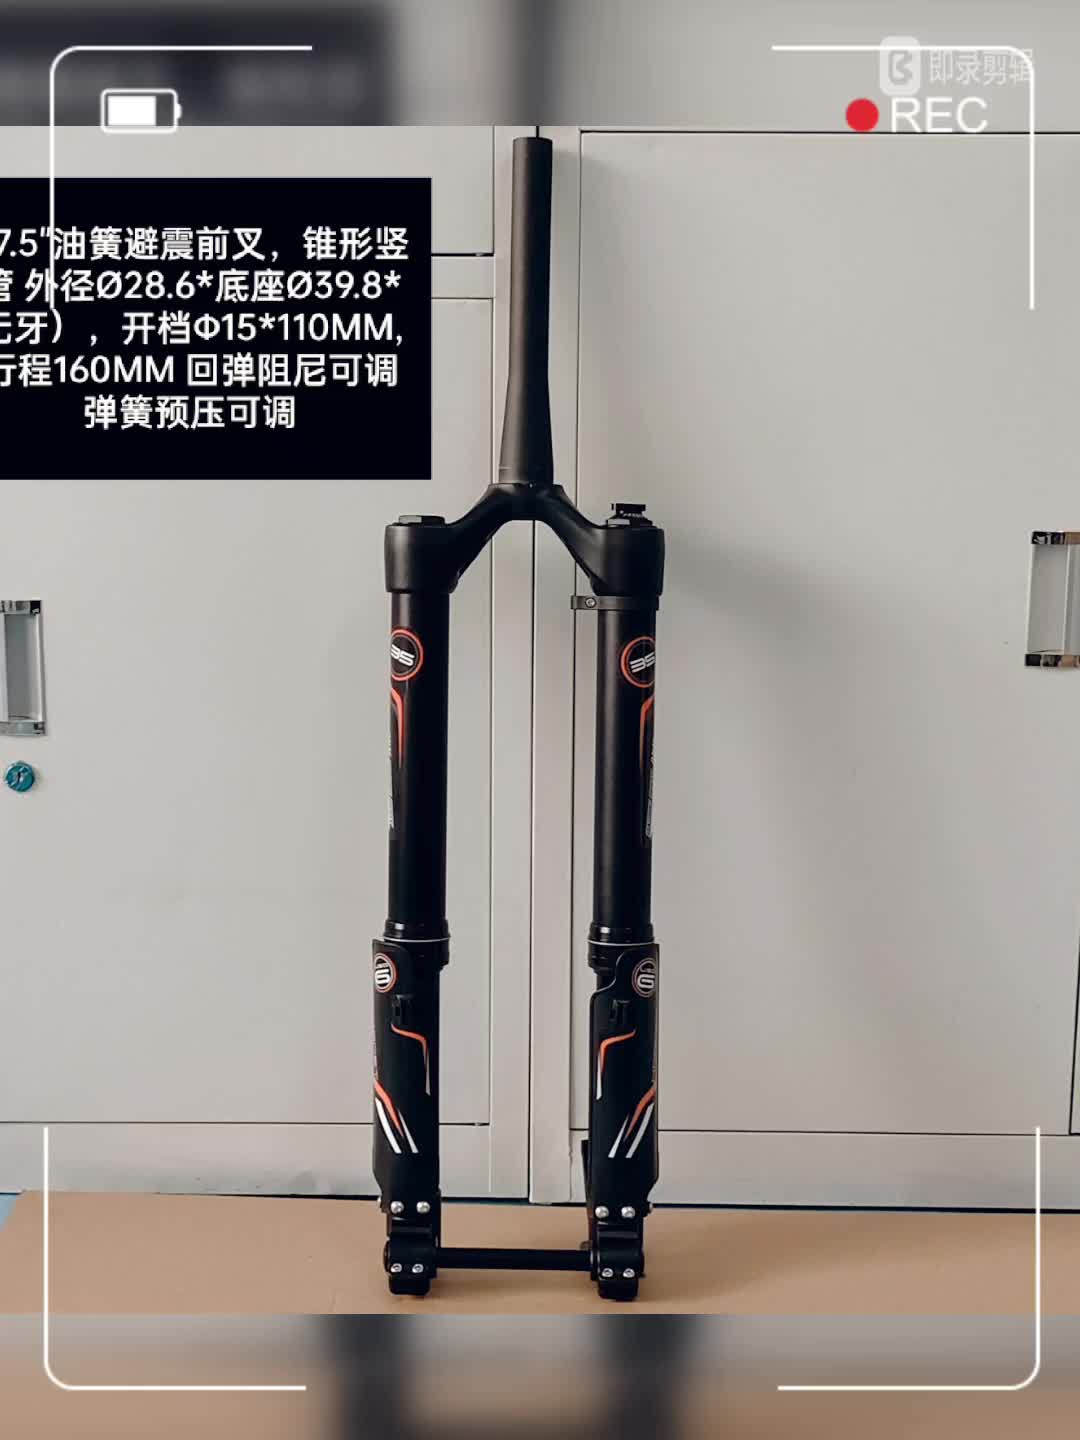 Dnm Usd-6 Bicycle Suspension Inverted Front Fork/doodlebike - Buy Bike  Fork,Bicycle Fork,Bike Suspension Fork Product on Alibaba.com